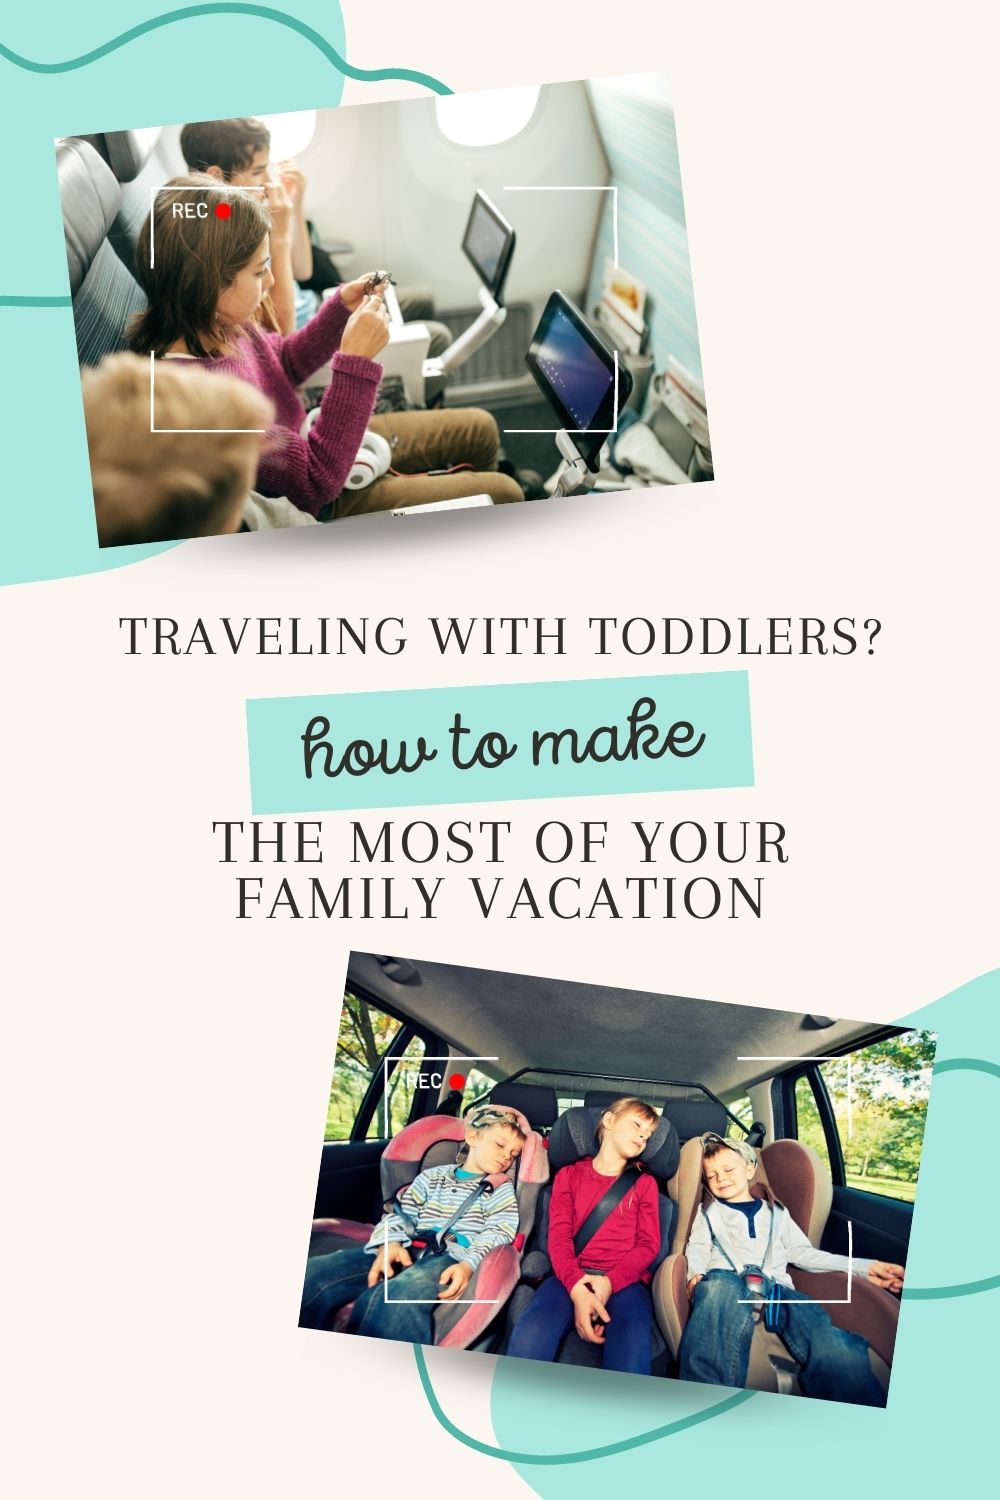 Traveling with Toddlers? How to Make the Most of Your Family Vacation